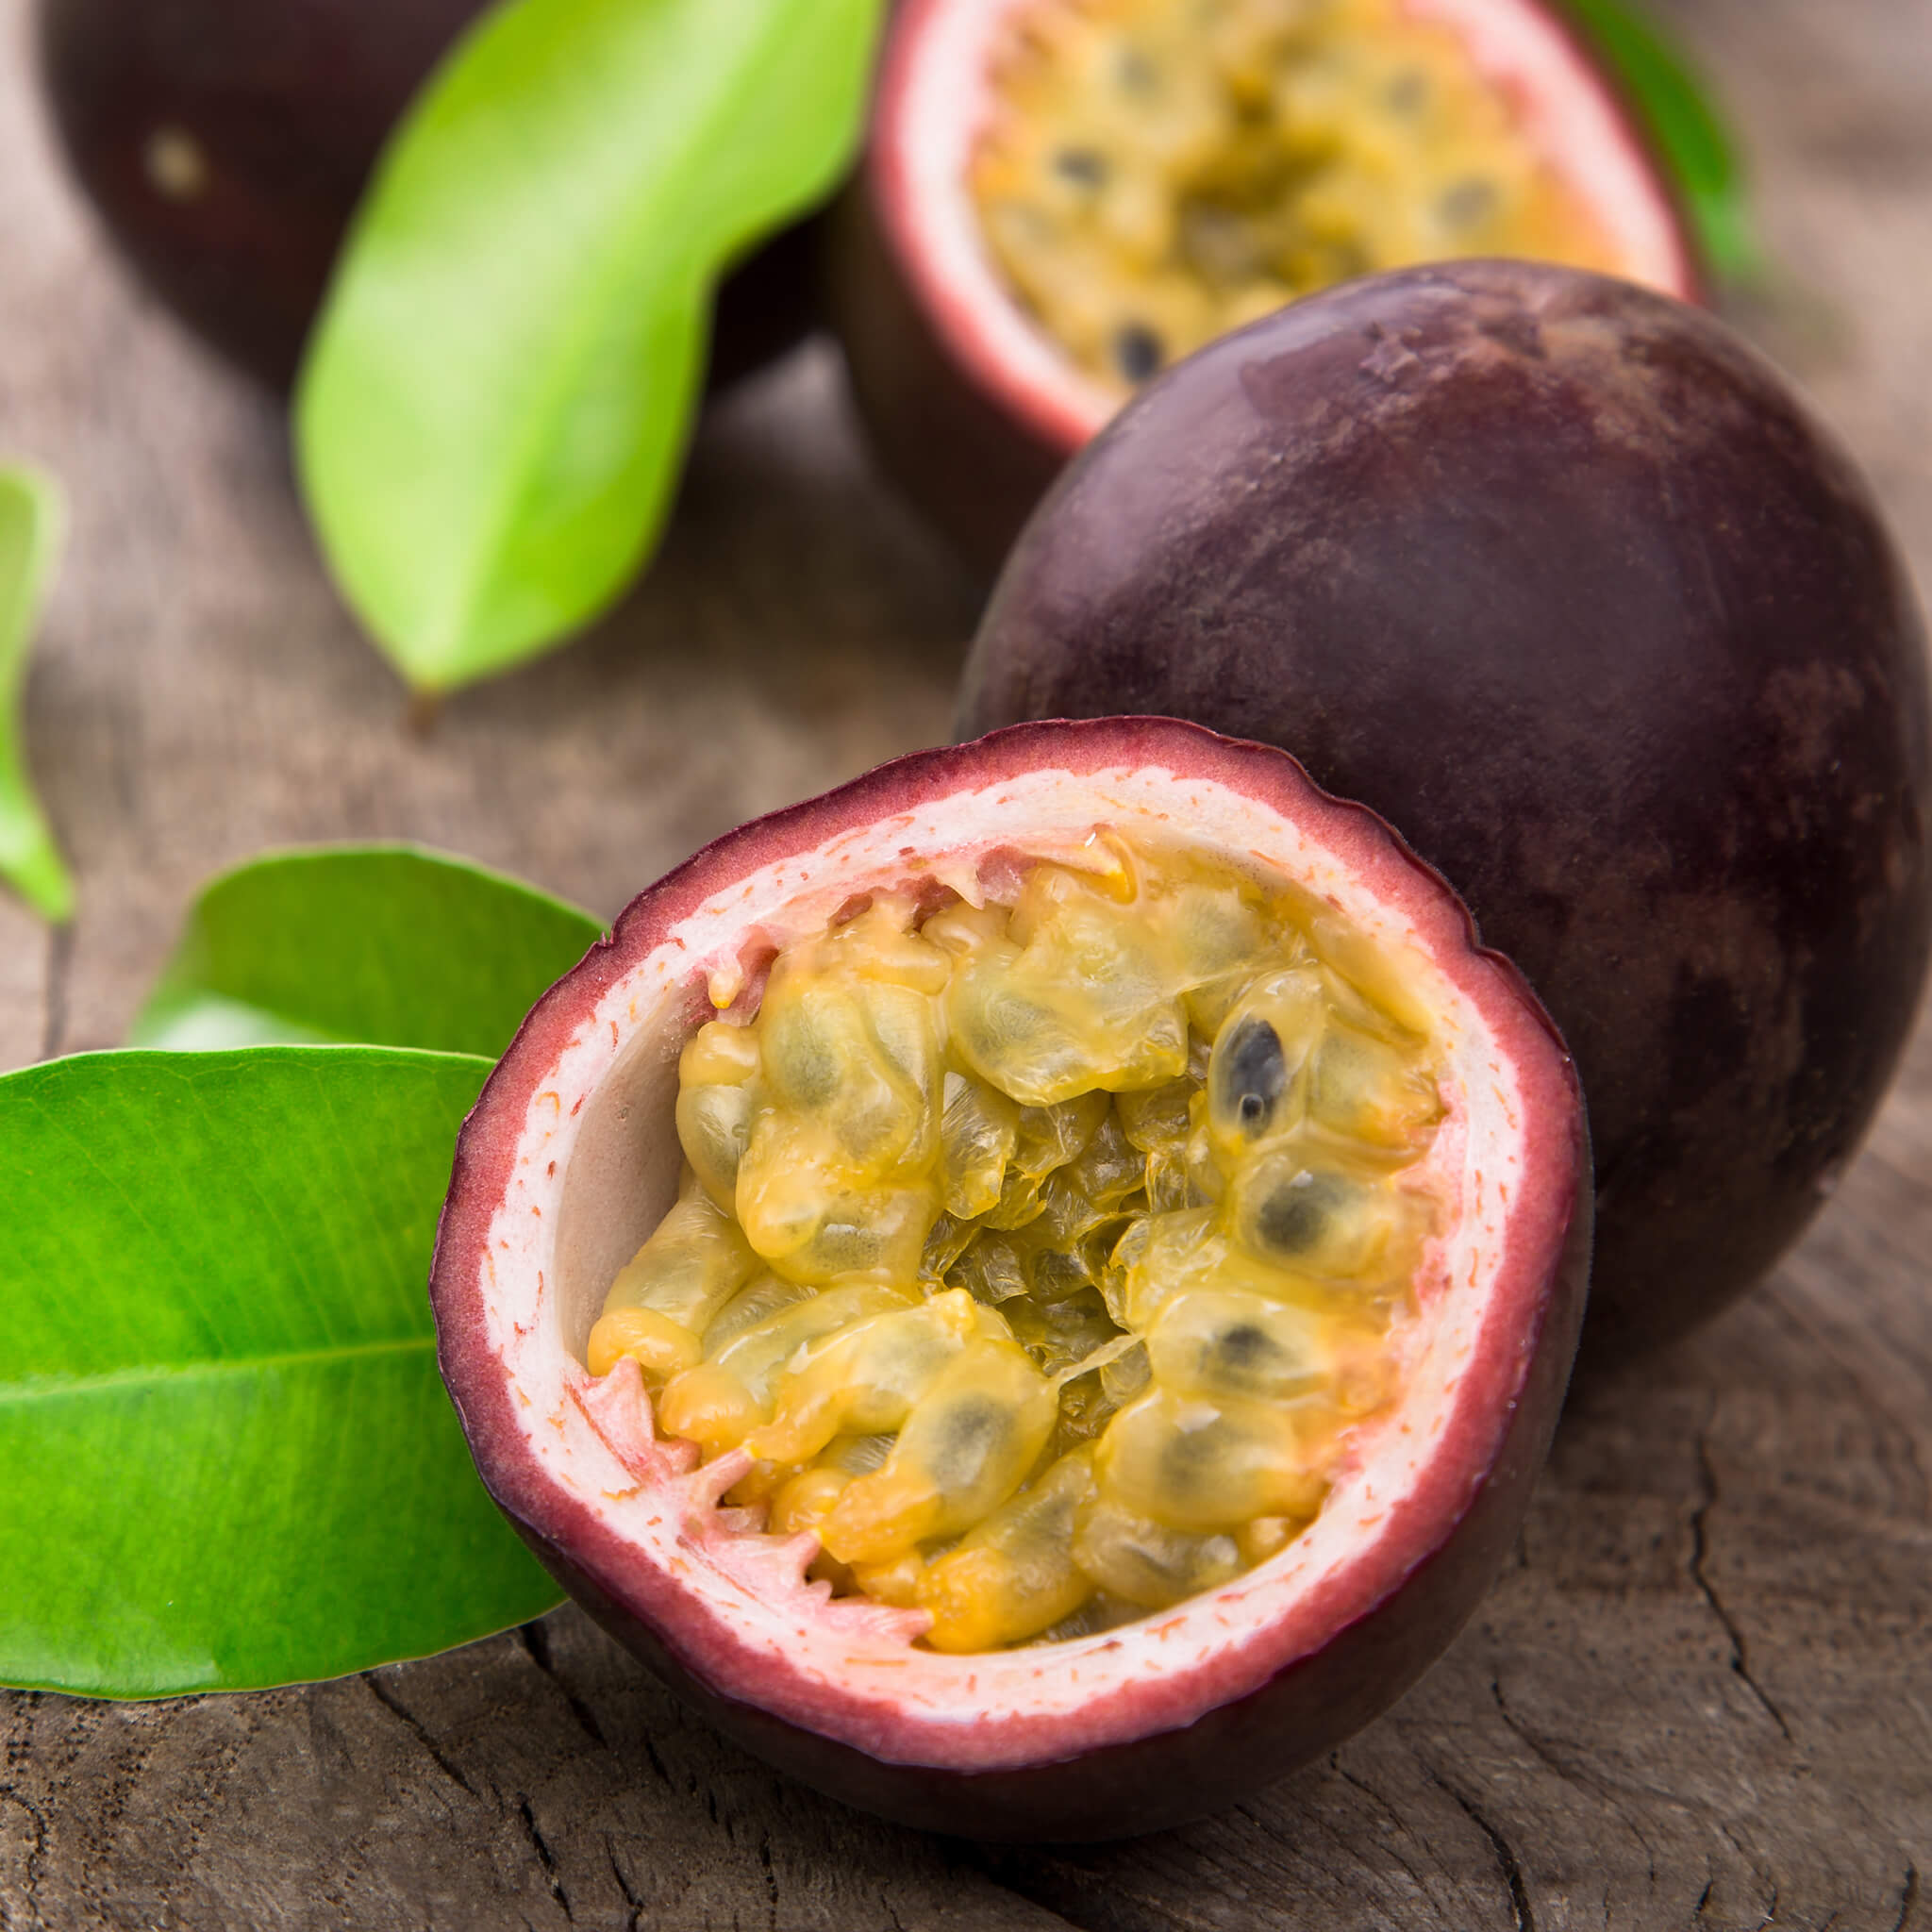 Product Page Key Ingredients: Passionfruit Oil